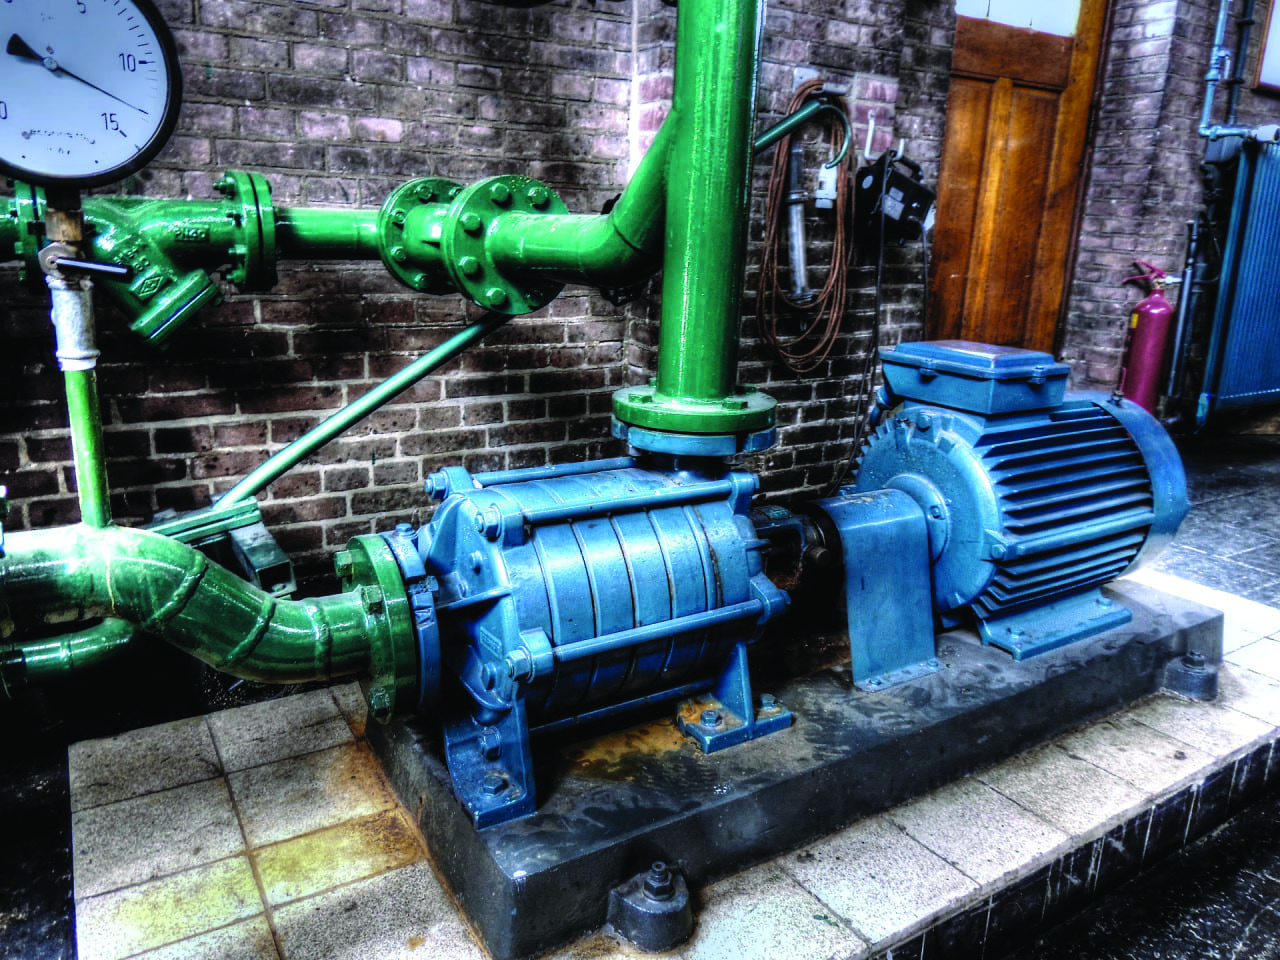 12 Tips for Centrifugal Pump Safety